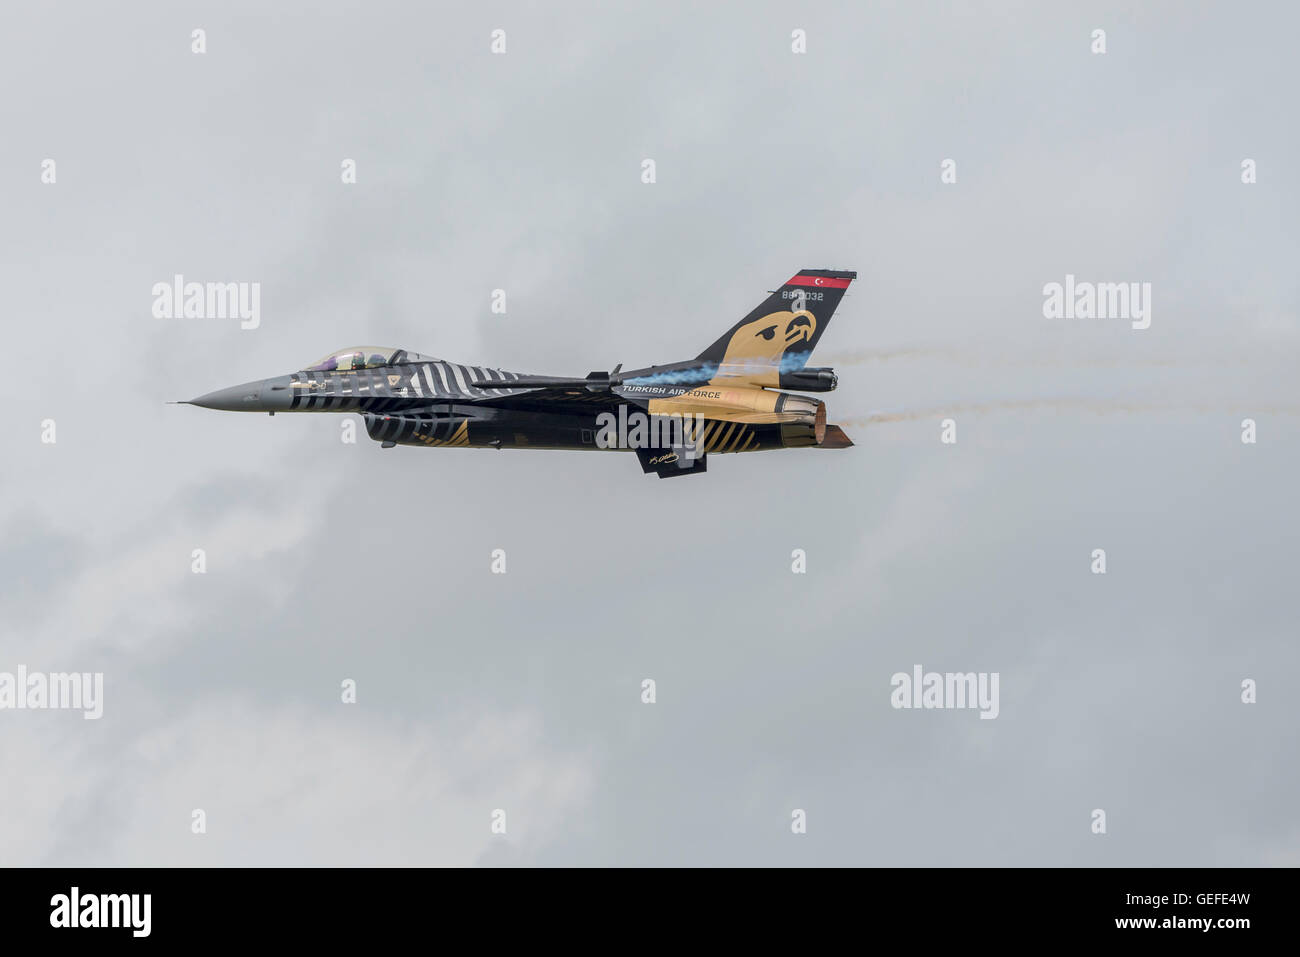 LM F-16 Fighting Falcon Turkish Air force RIAT Fairford Inghilterra UK Air show Foto Stock